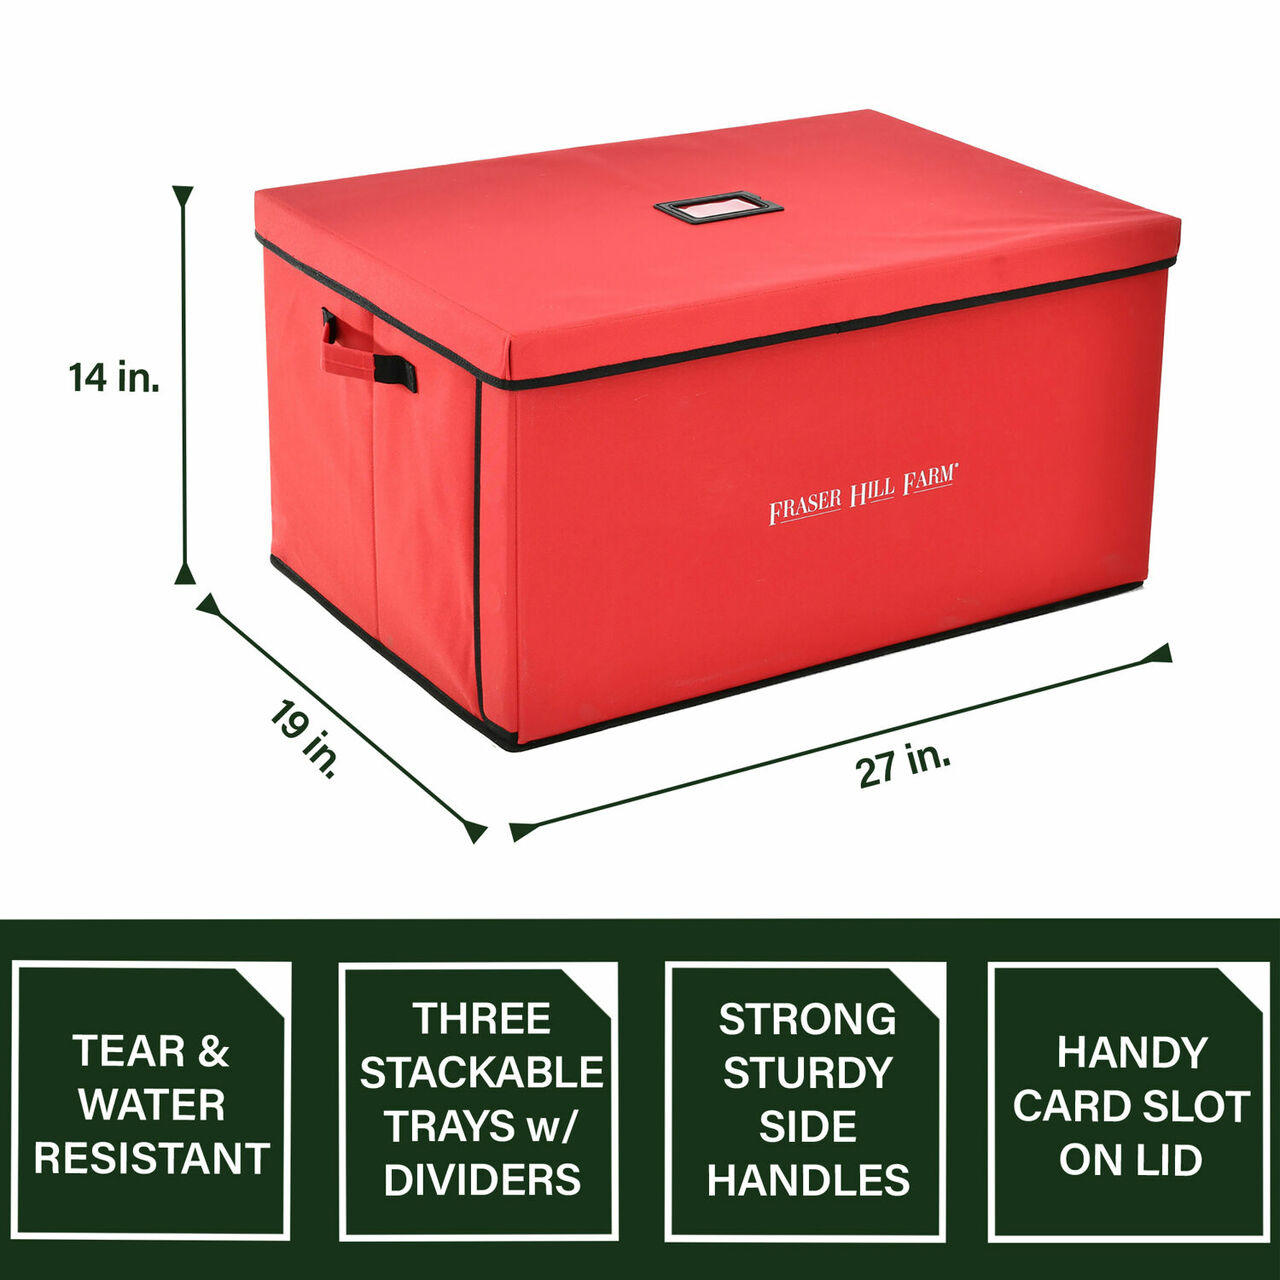 https://cdn11.bigcommerce.com/s-2tgc1eknzf/images/stencil/original/products/1578/13757/fraser-hill-farm-fraser-hill-farm-christmas-ornament-storage-box-with-3-drawers-and-removable-dividers-red-ffsborn027-rd__59096.1635524878.jpg?c=1